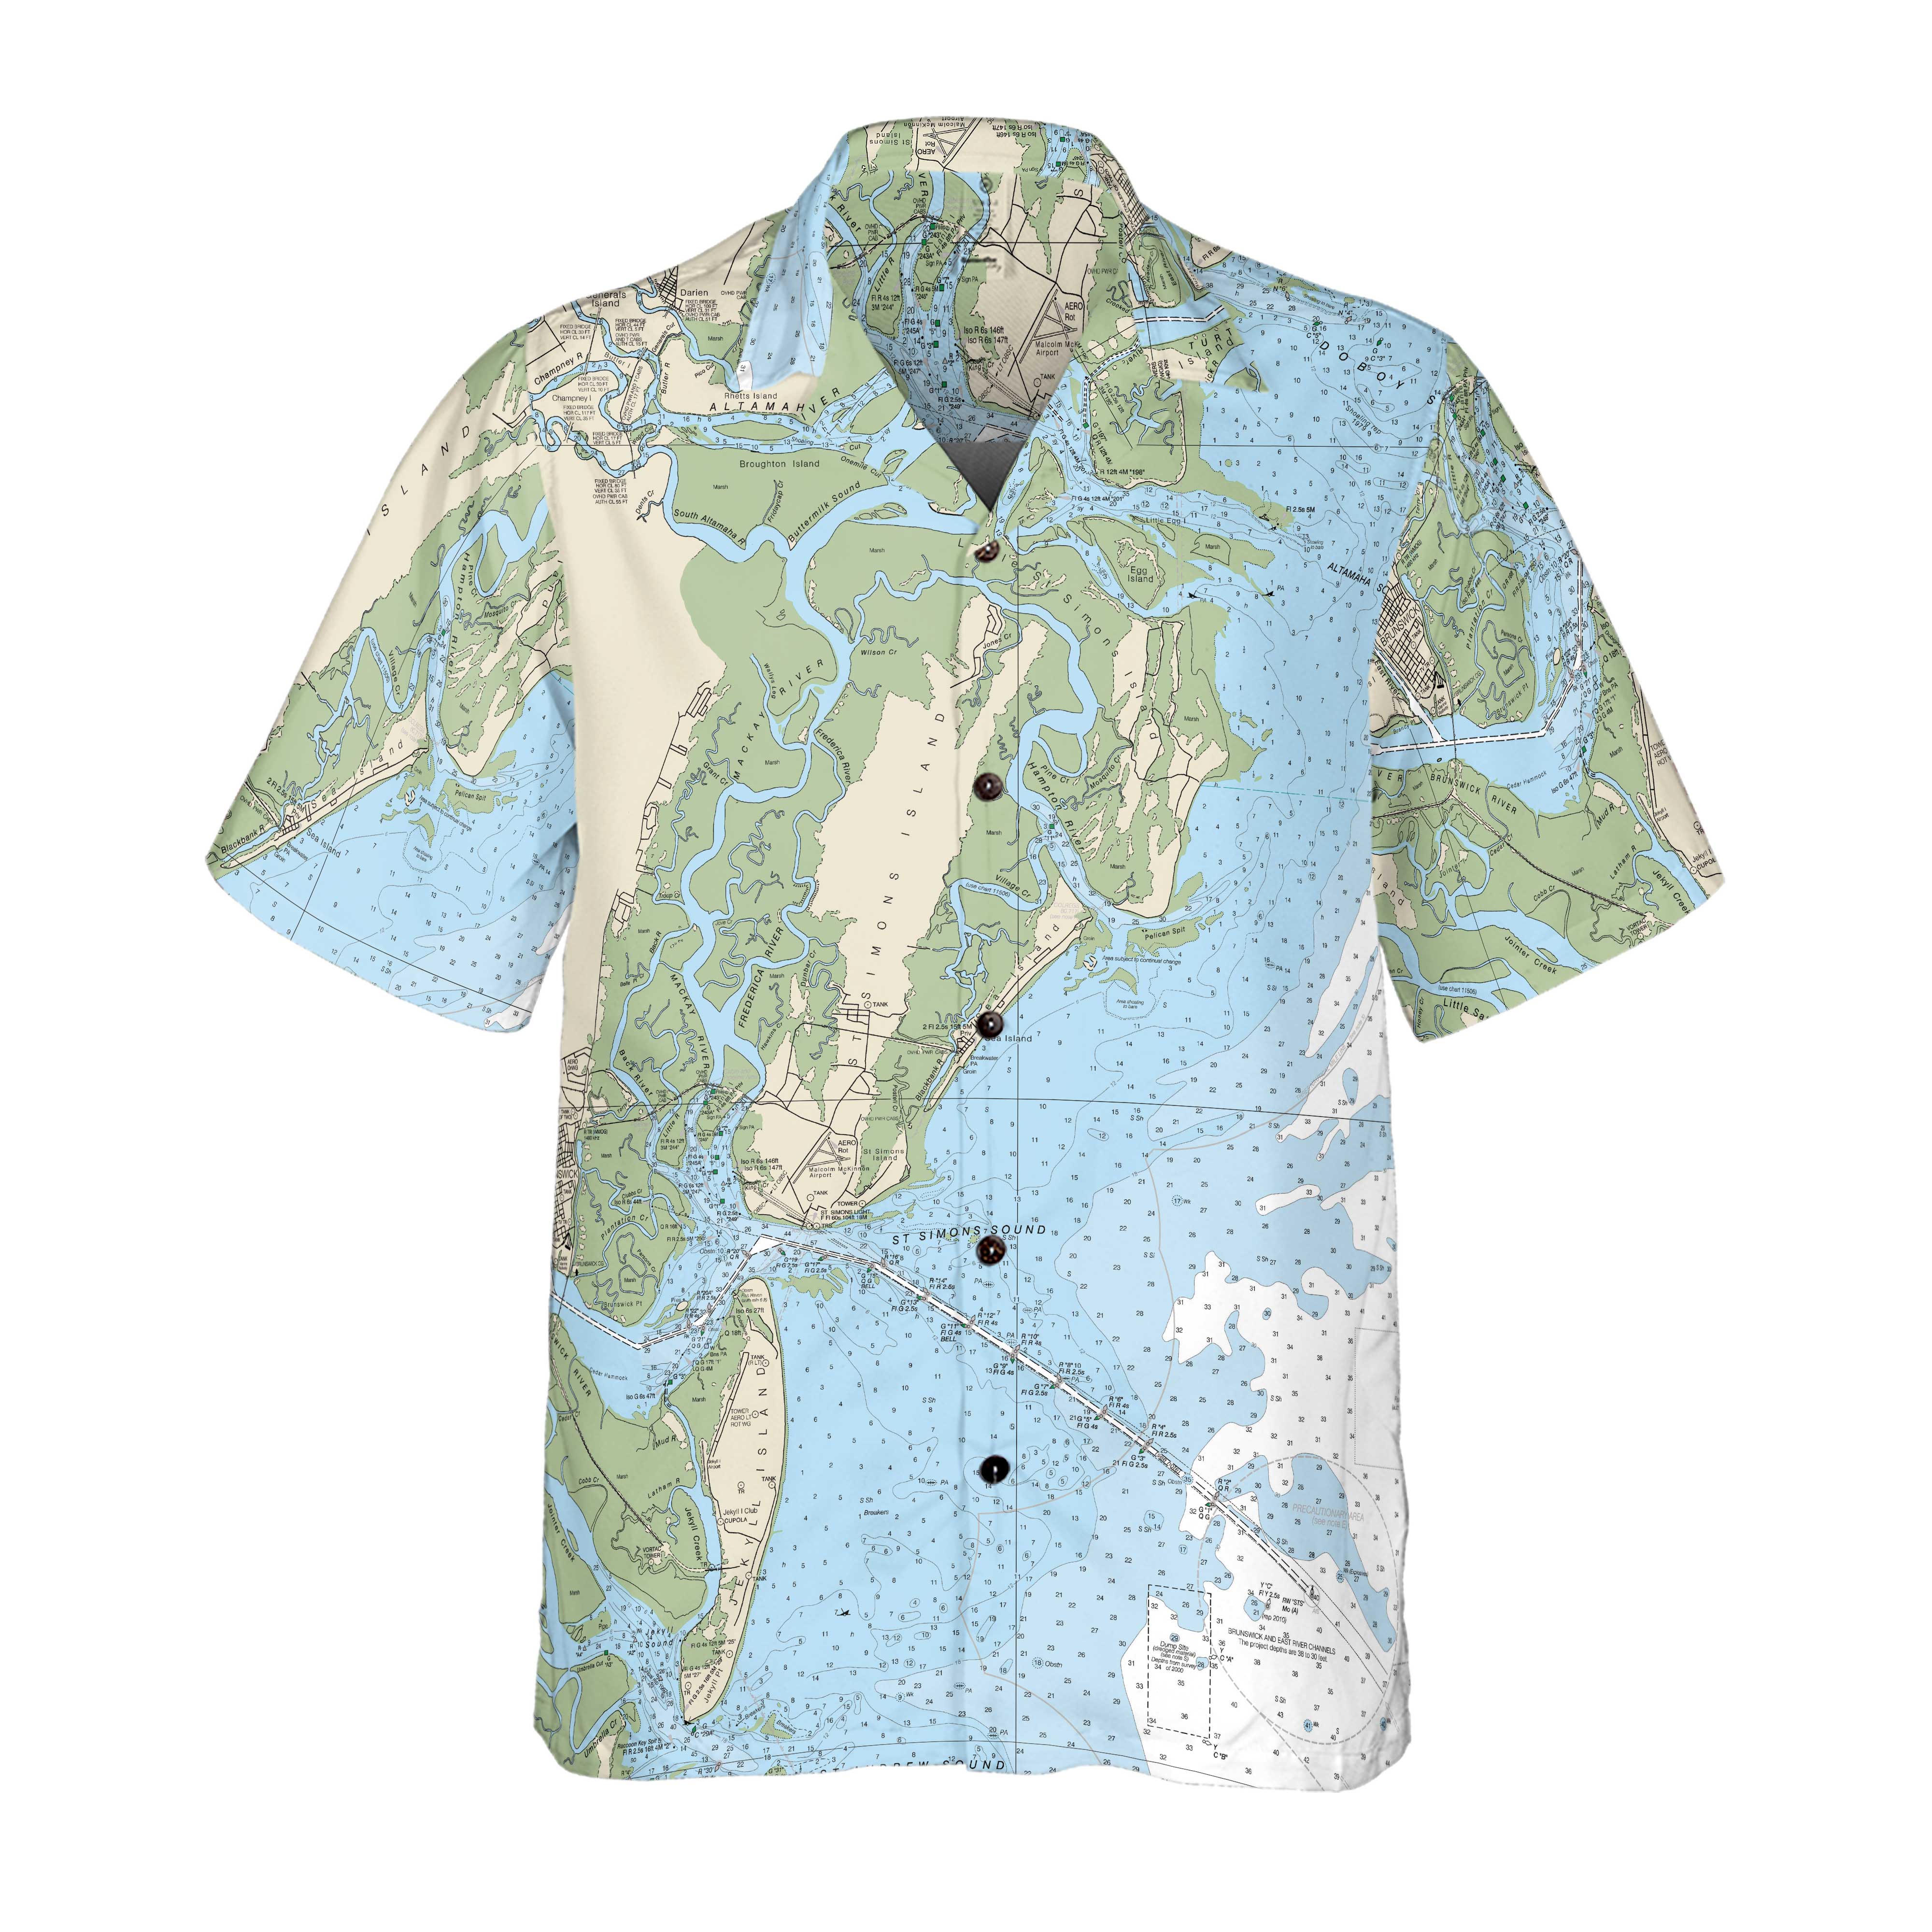 The Golden Isles Coconut Button Camp Shirt